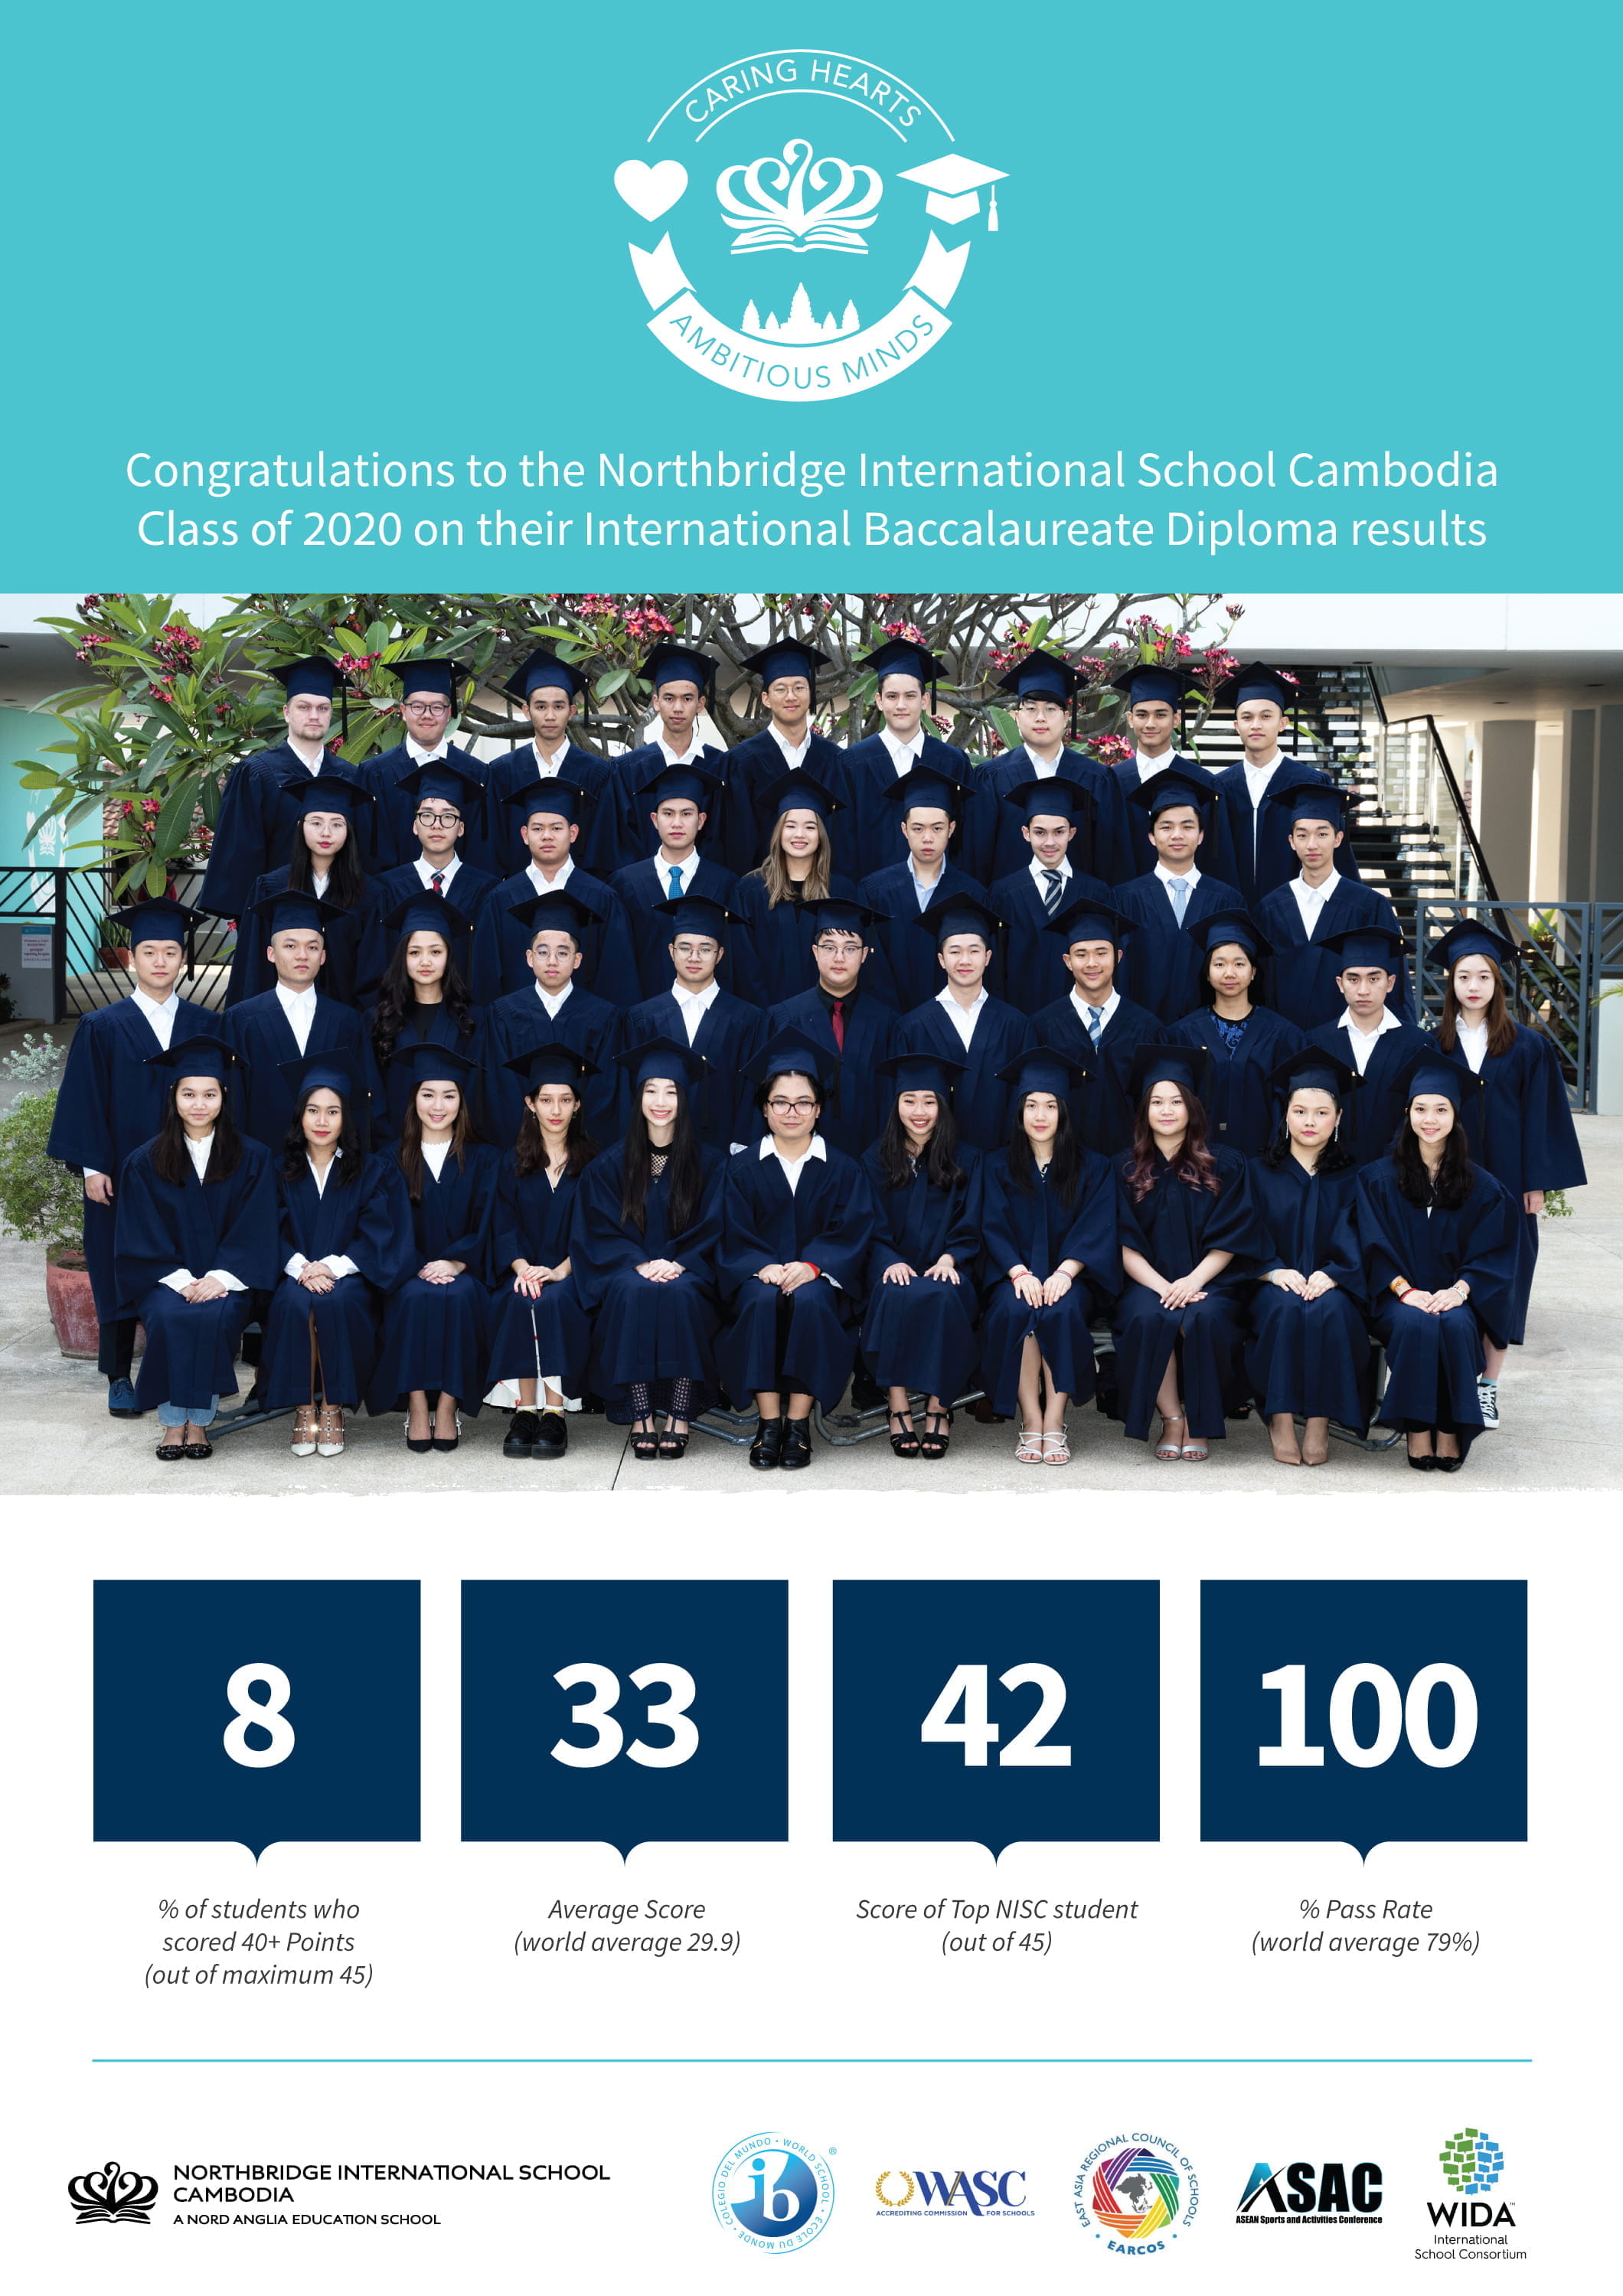 Outstanding results achieved by our Northbridge IB Diploma students for the 2019/20 academic year - outstanding-results-achieved-by-our-northbridge-ib-diploma-students-for-the-201920-academic-year